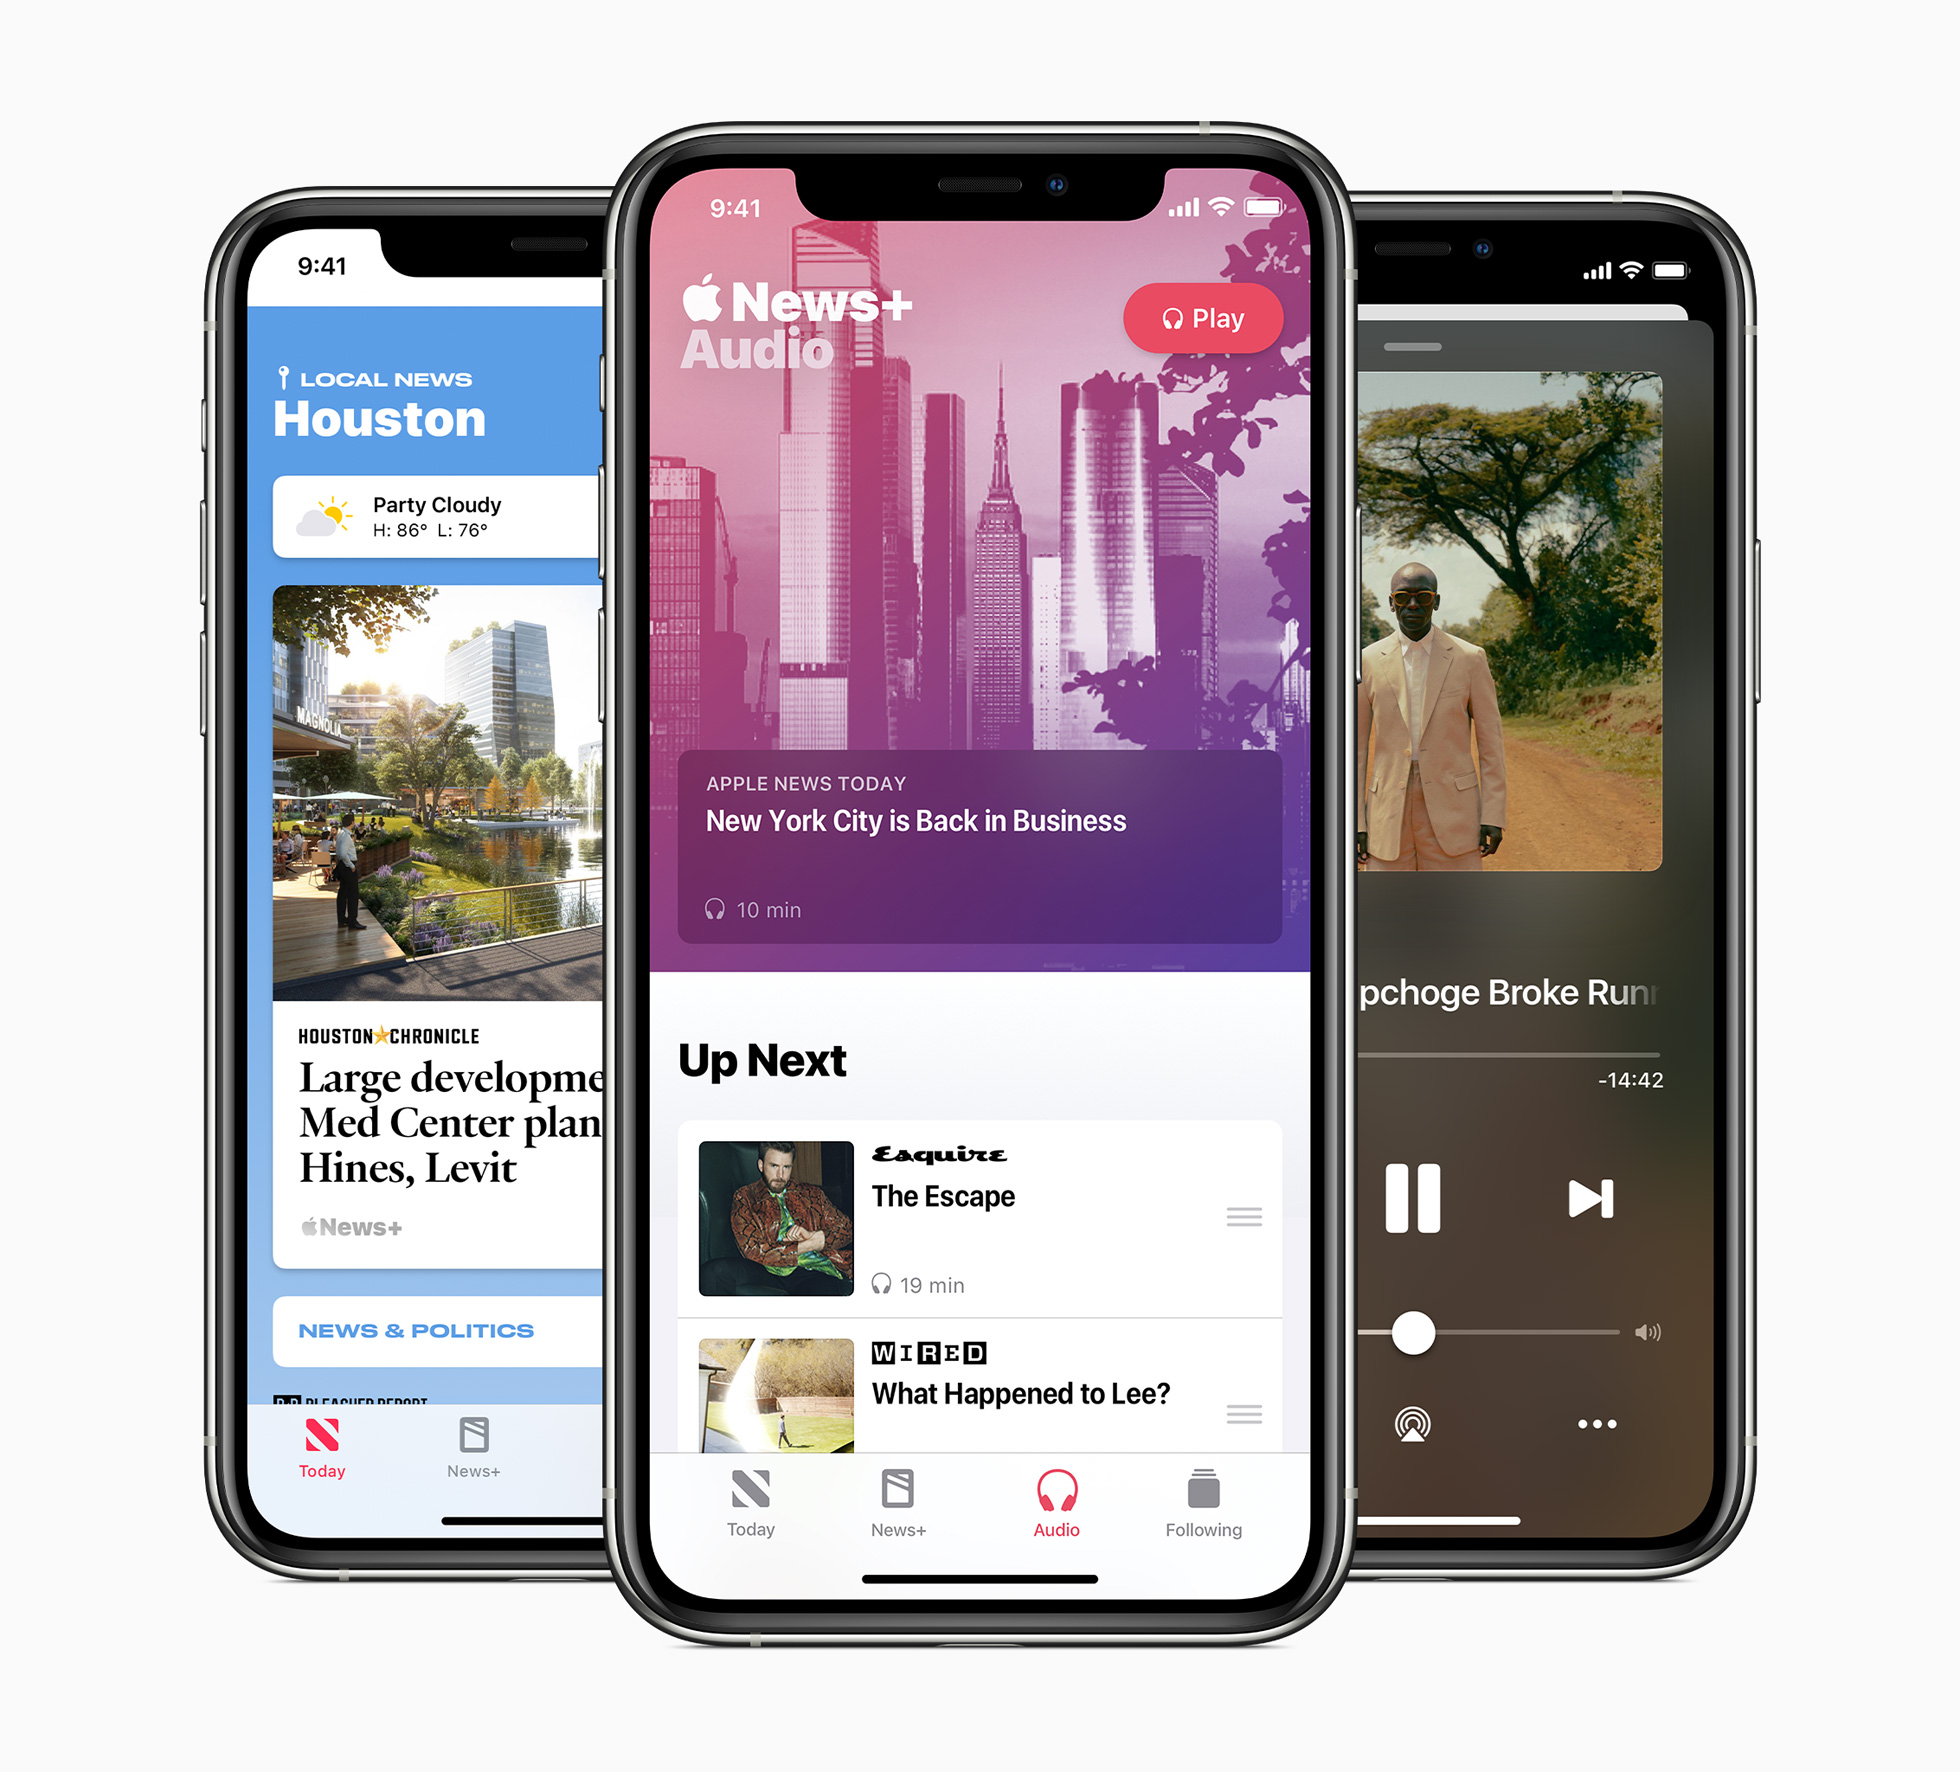 Apple News launches new audio features